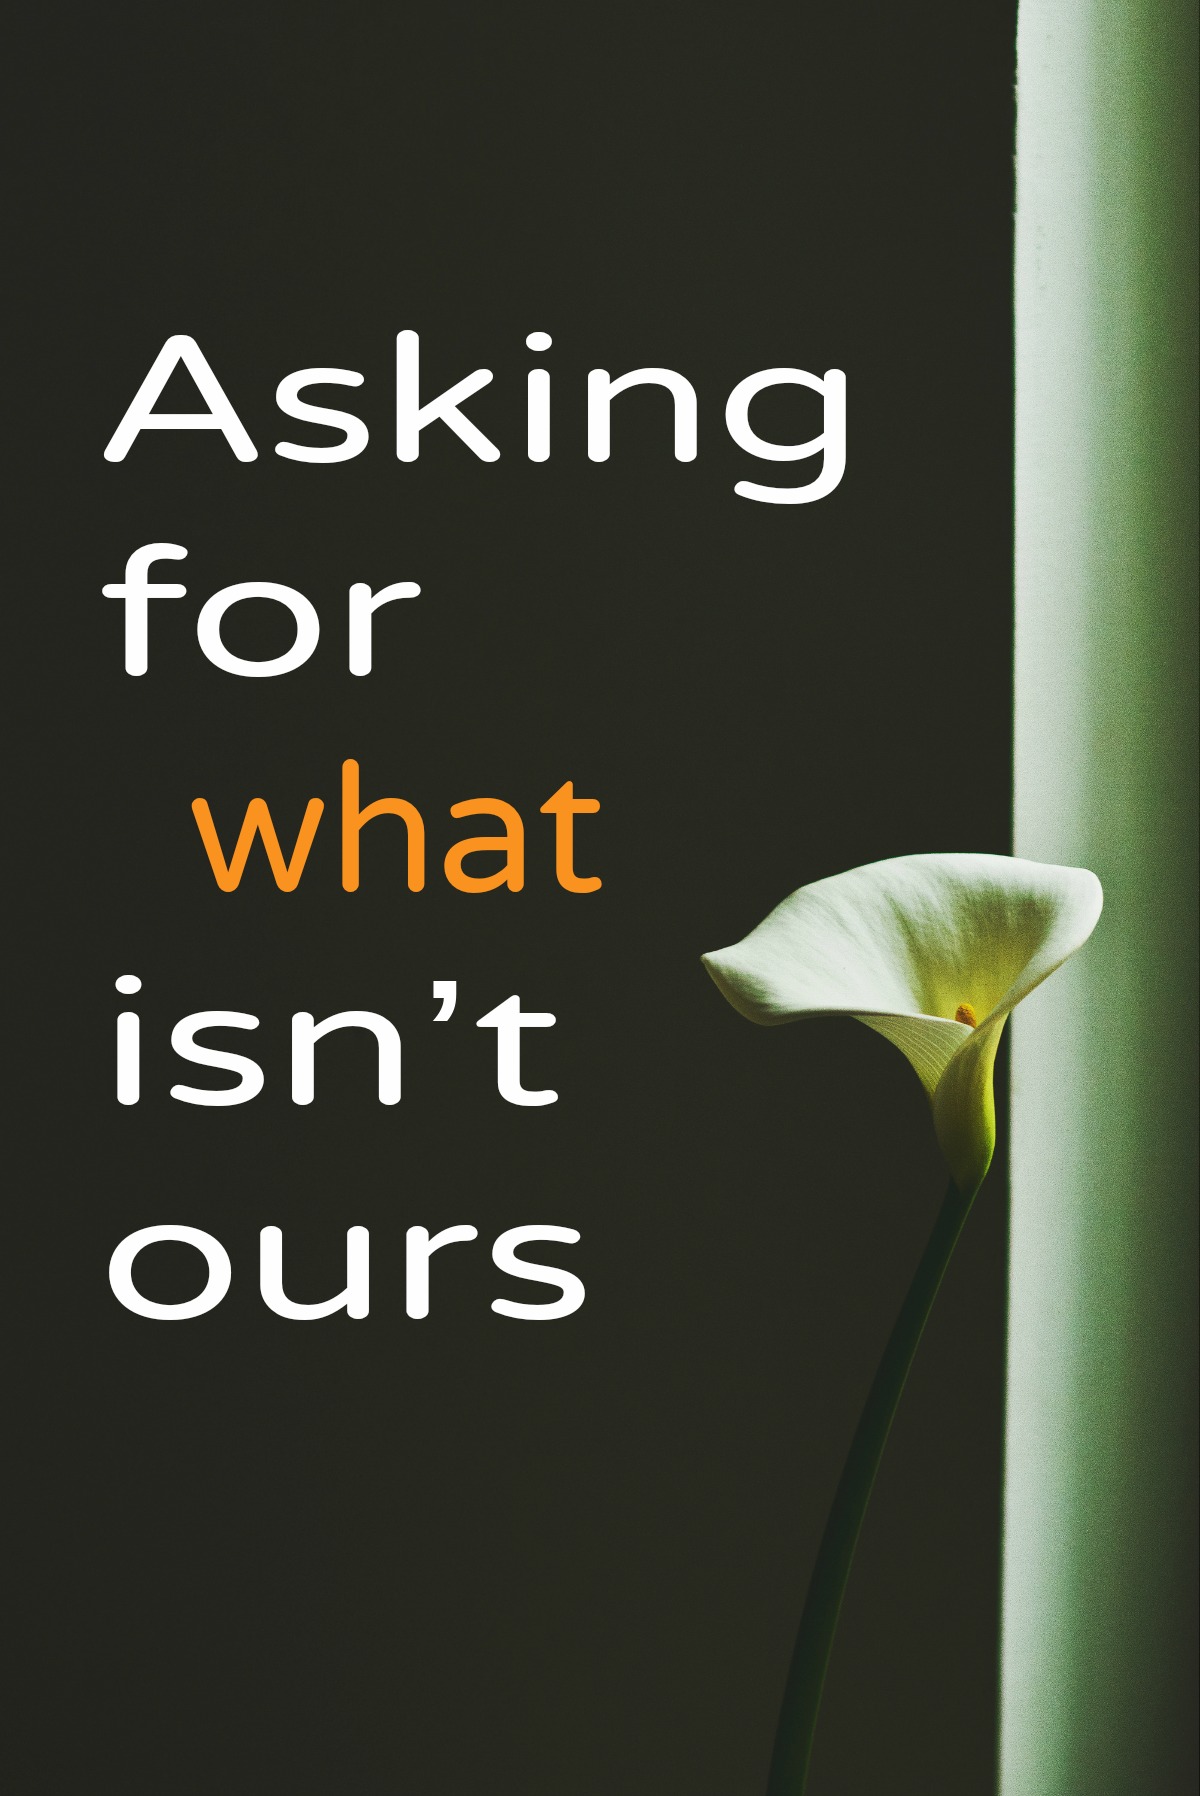 Asking for what isn’t ours